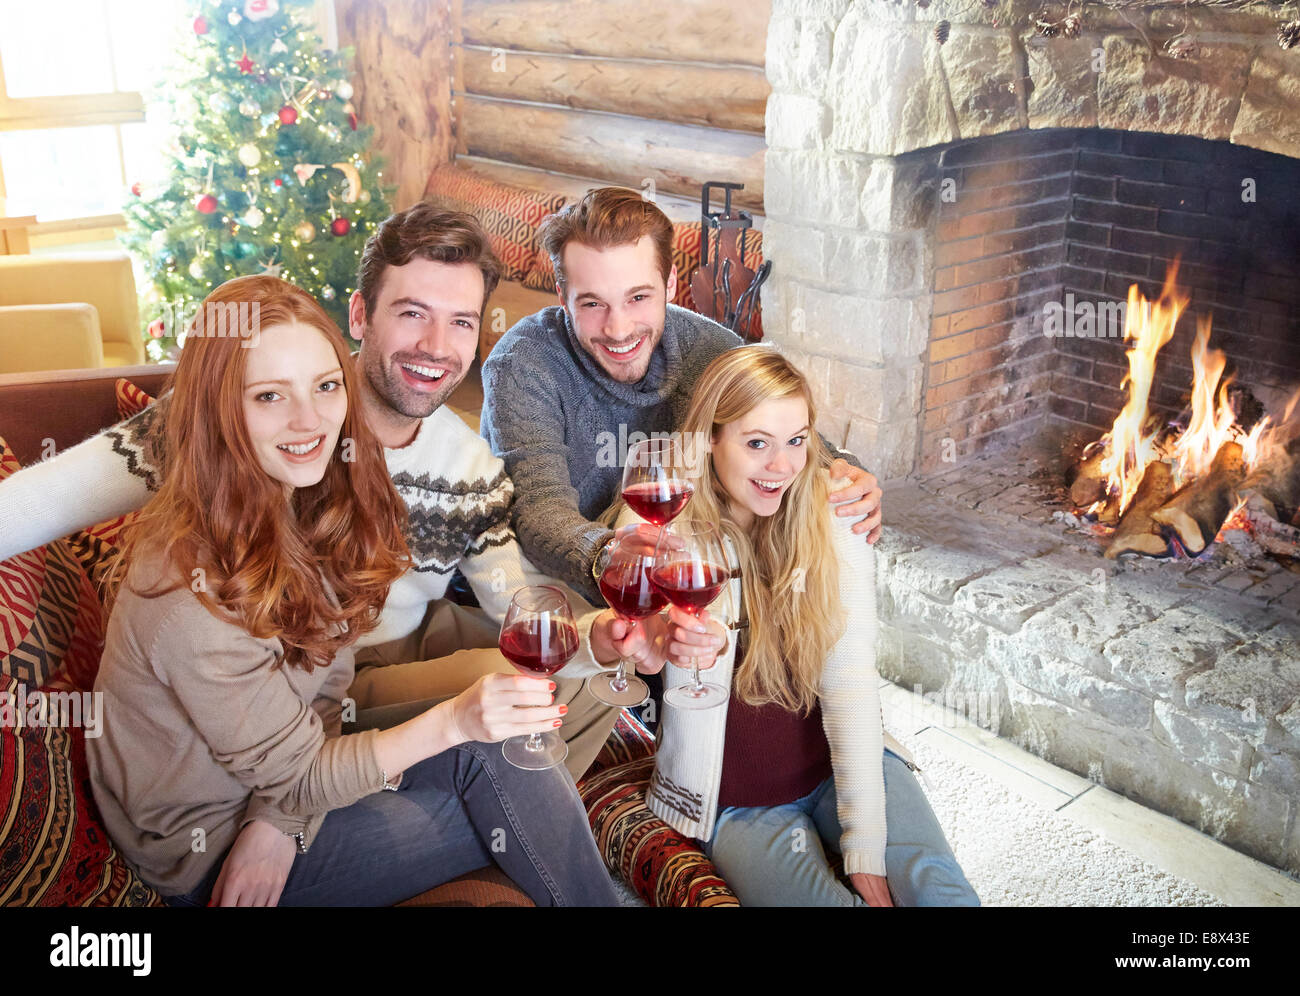 Friends celebrating with drinks in log cabin Stock Photo